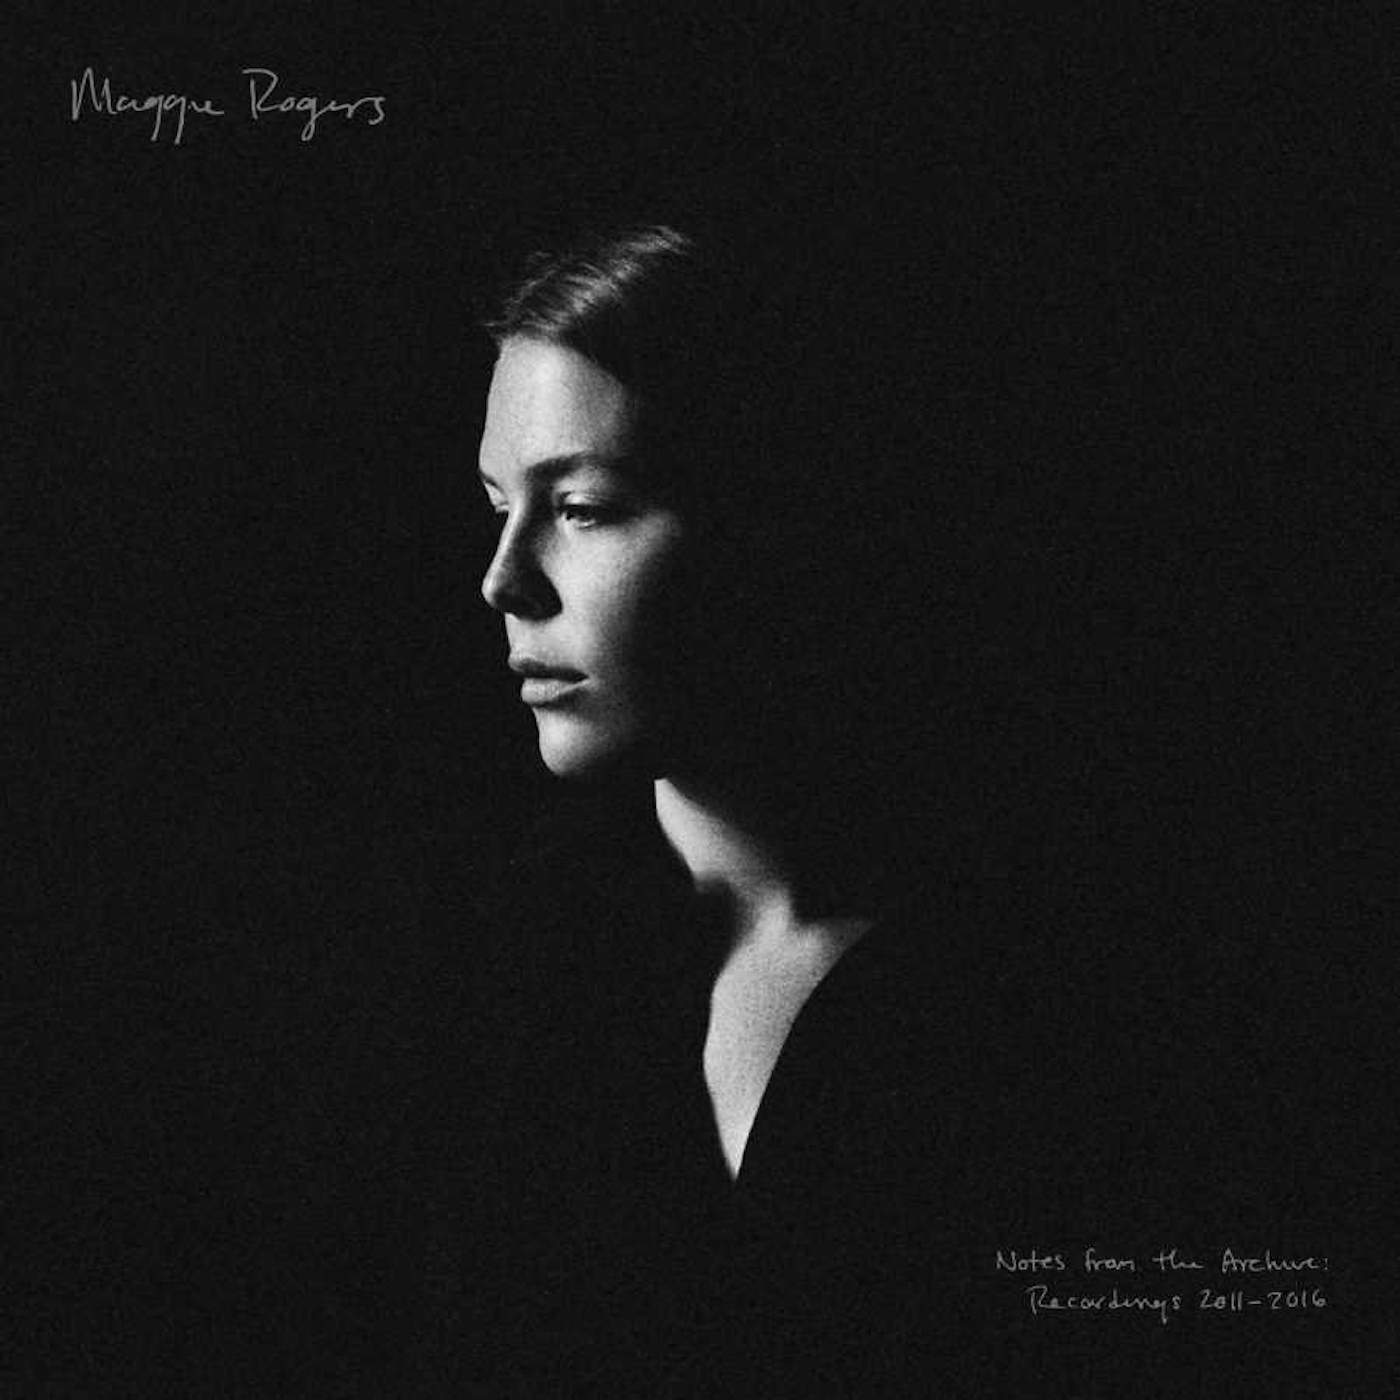 Maggie Rogers NOTES FROM THE ARCHIVE: RECORDINGS 2011-2016 (2LP/MARIGOLD VINYL) Vinyl Record